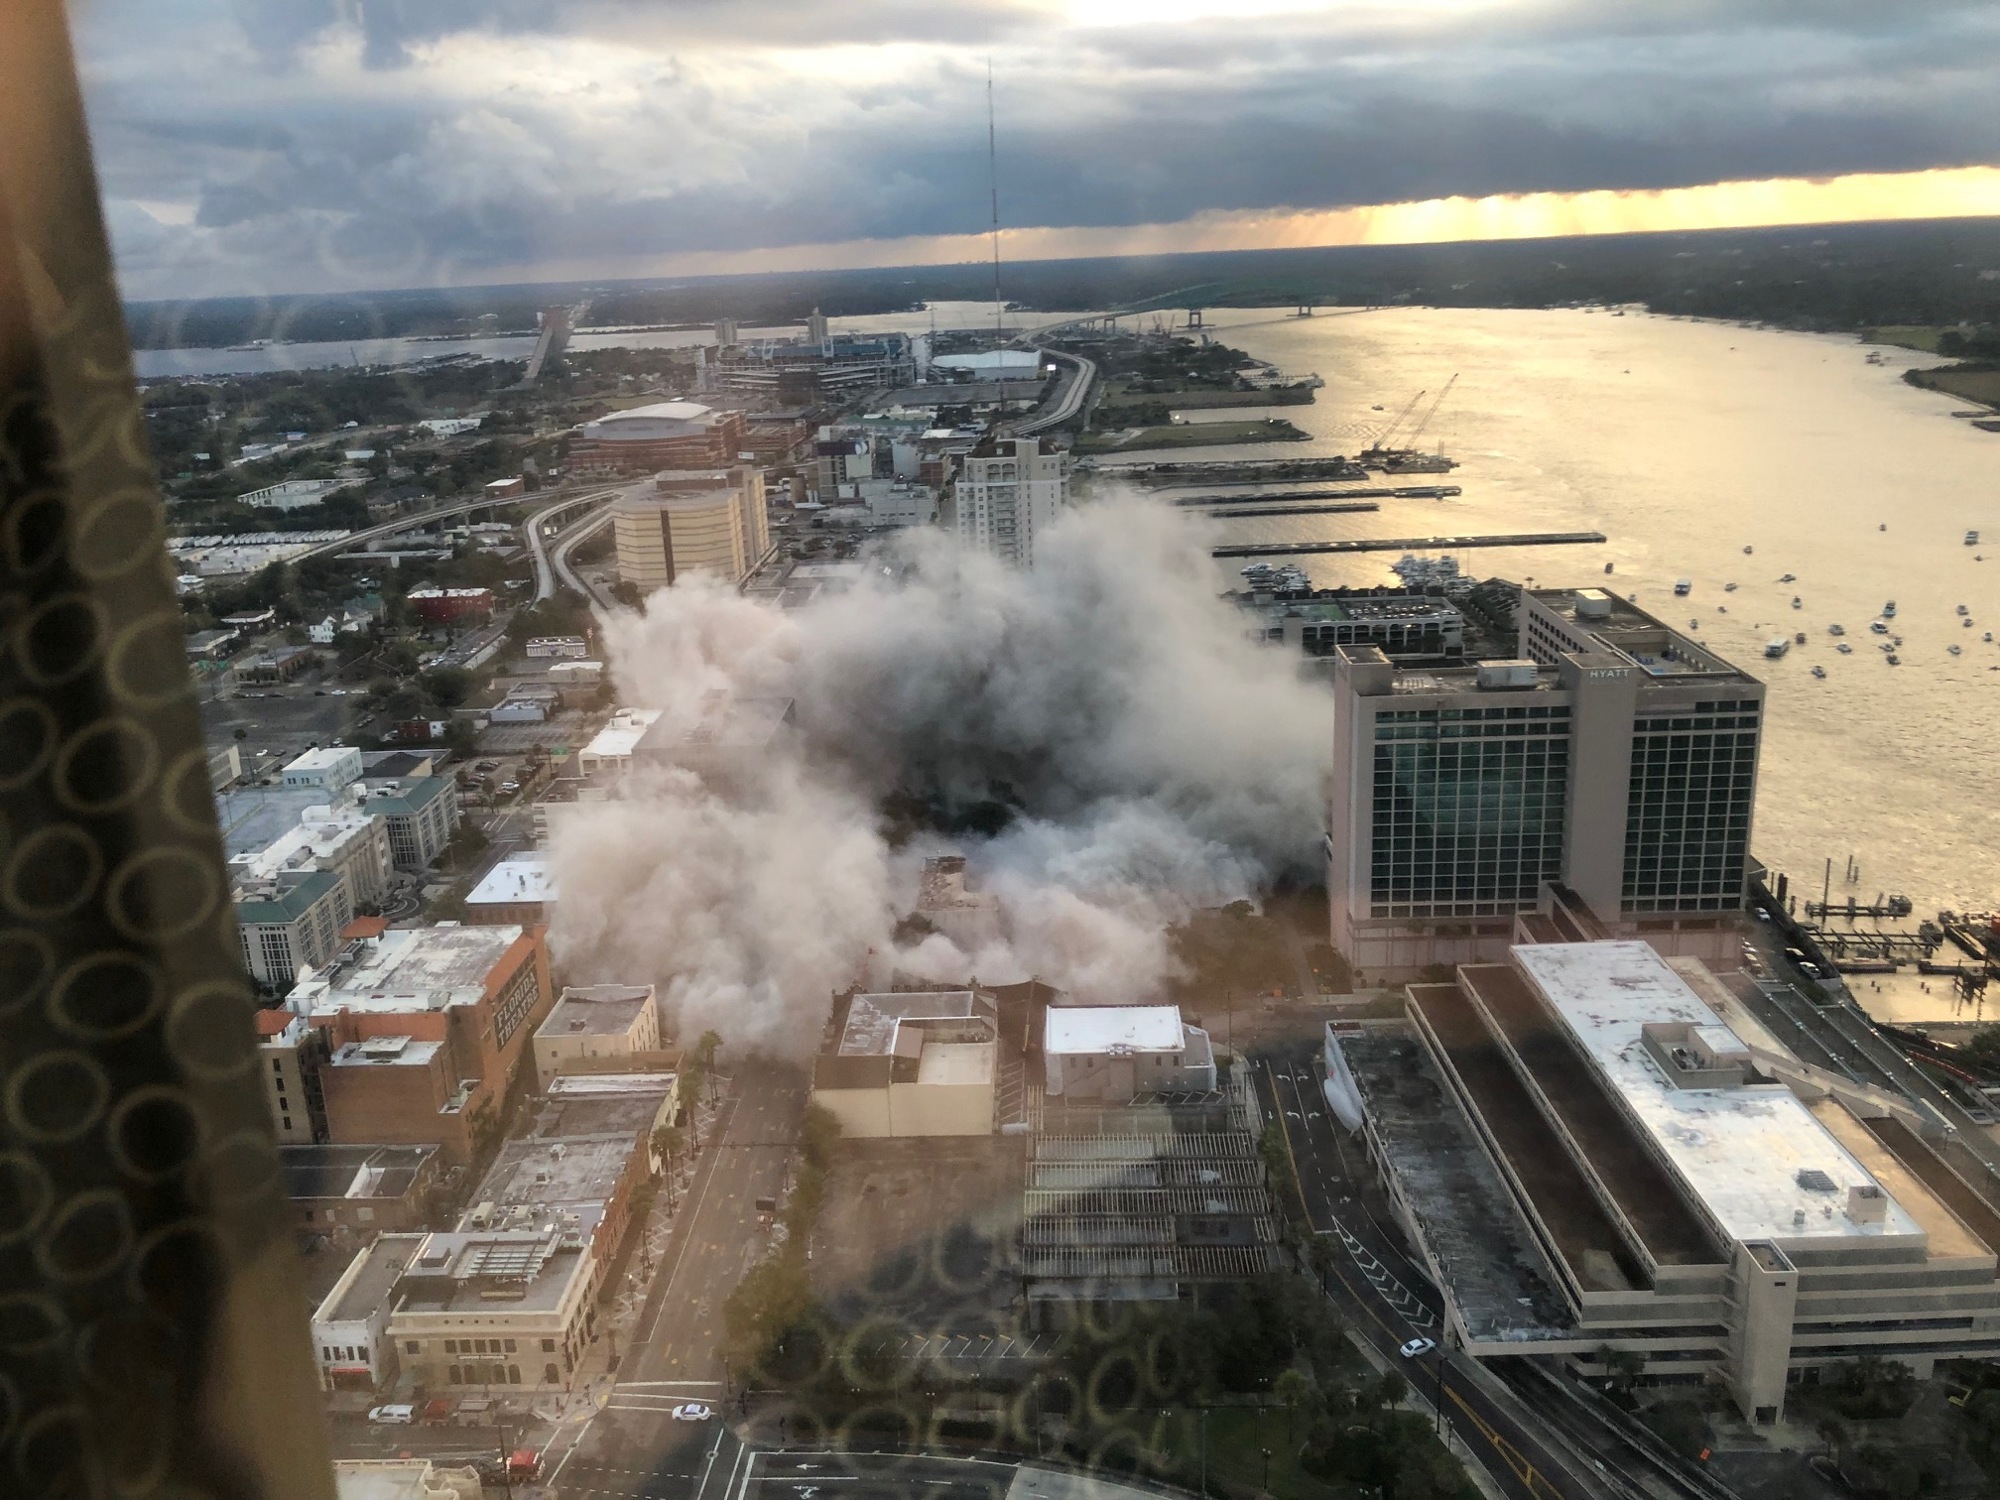 The dust cloud from the old City Hall after the implosion as seen from the River Club at the Wells Fargo Tower.